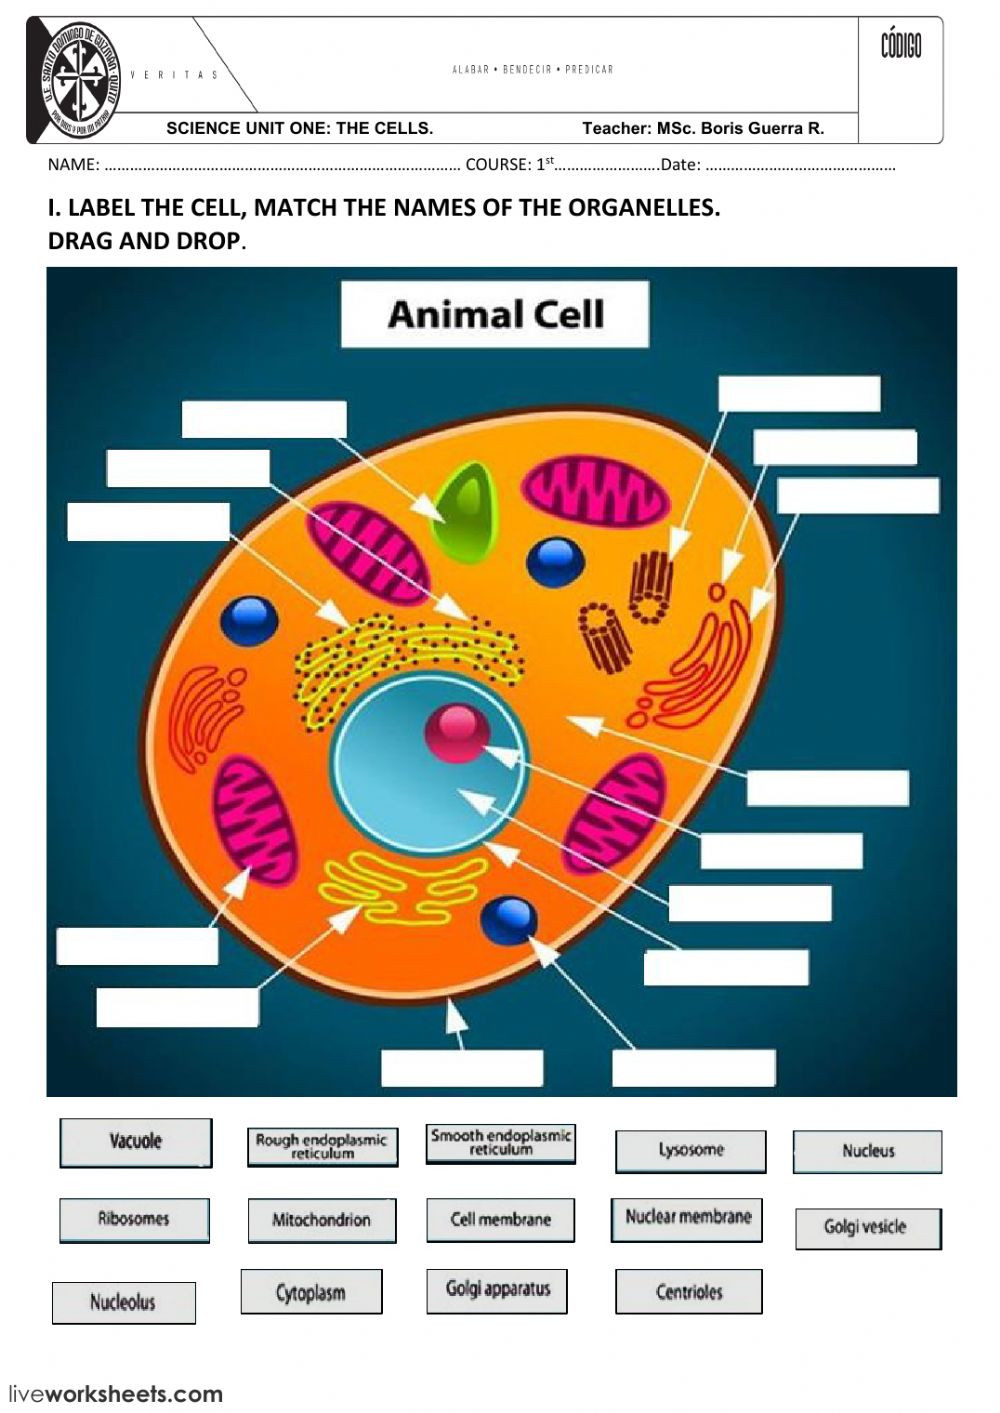 Animal and Plant Cells Worksheet Animal and Plant Cells Interactive Worksheet